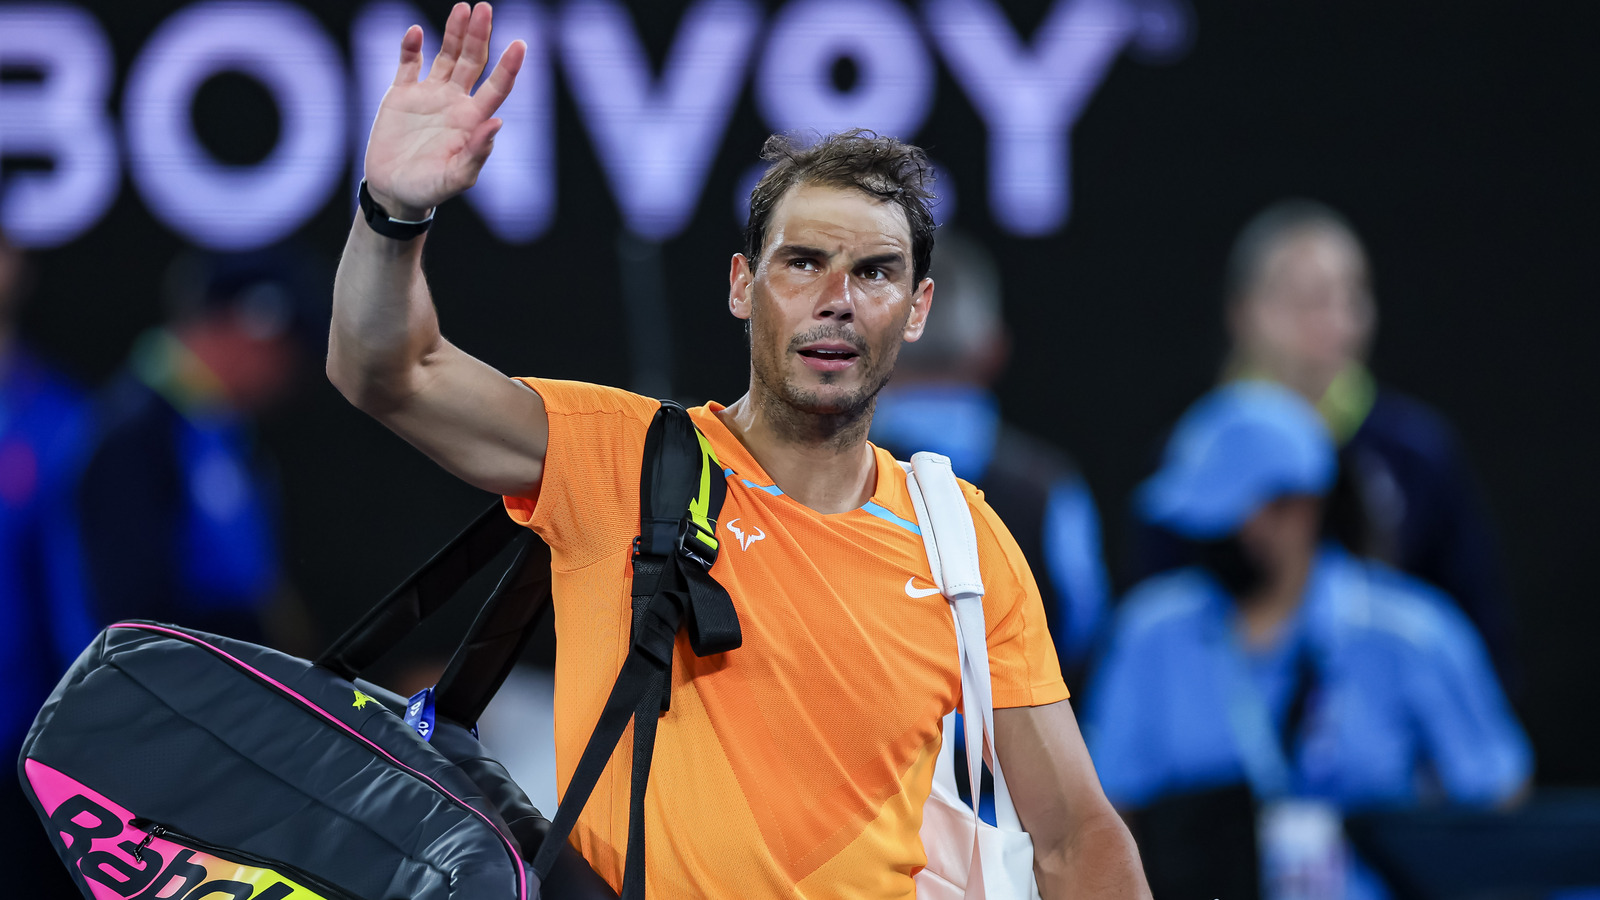 'For a long time I didn’t want to see him,' Jo-Wilfried Tsonga opens up on Rafael Nadal’s final season on tour as he wants the Spaniard ‘to come out in the best way by fighting’